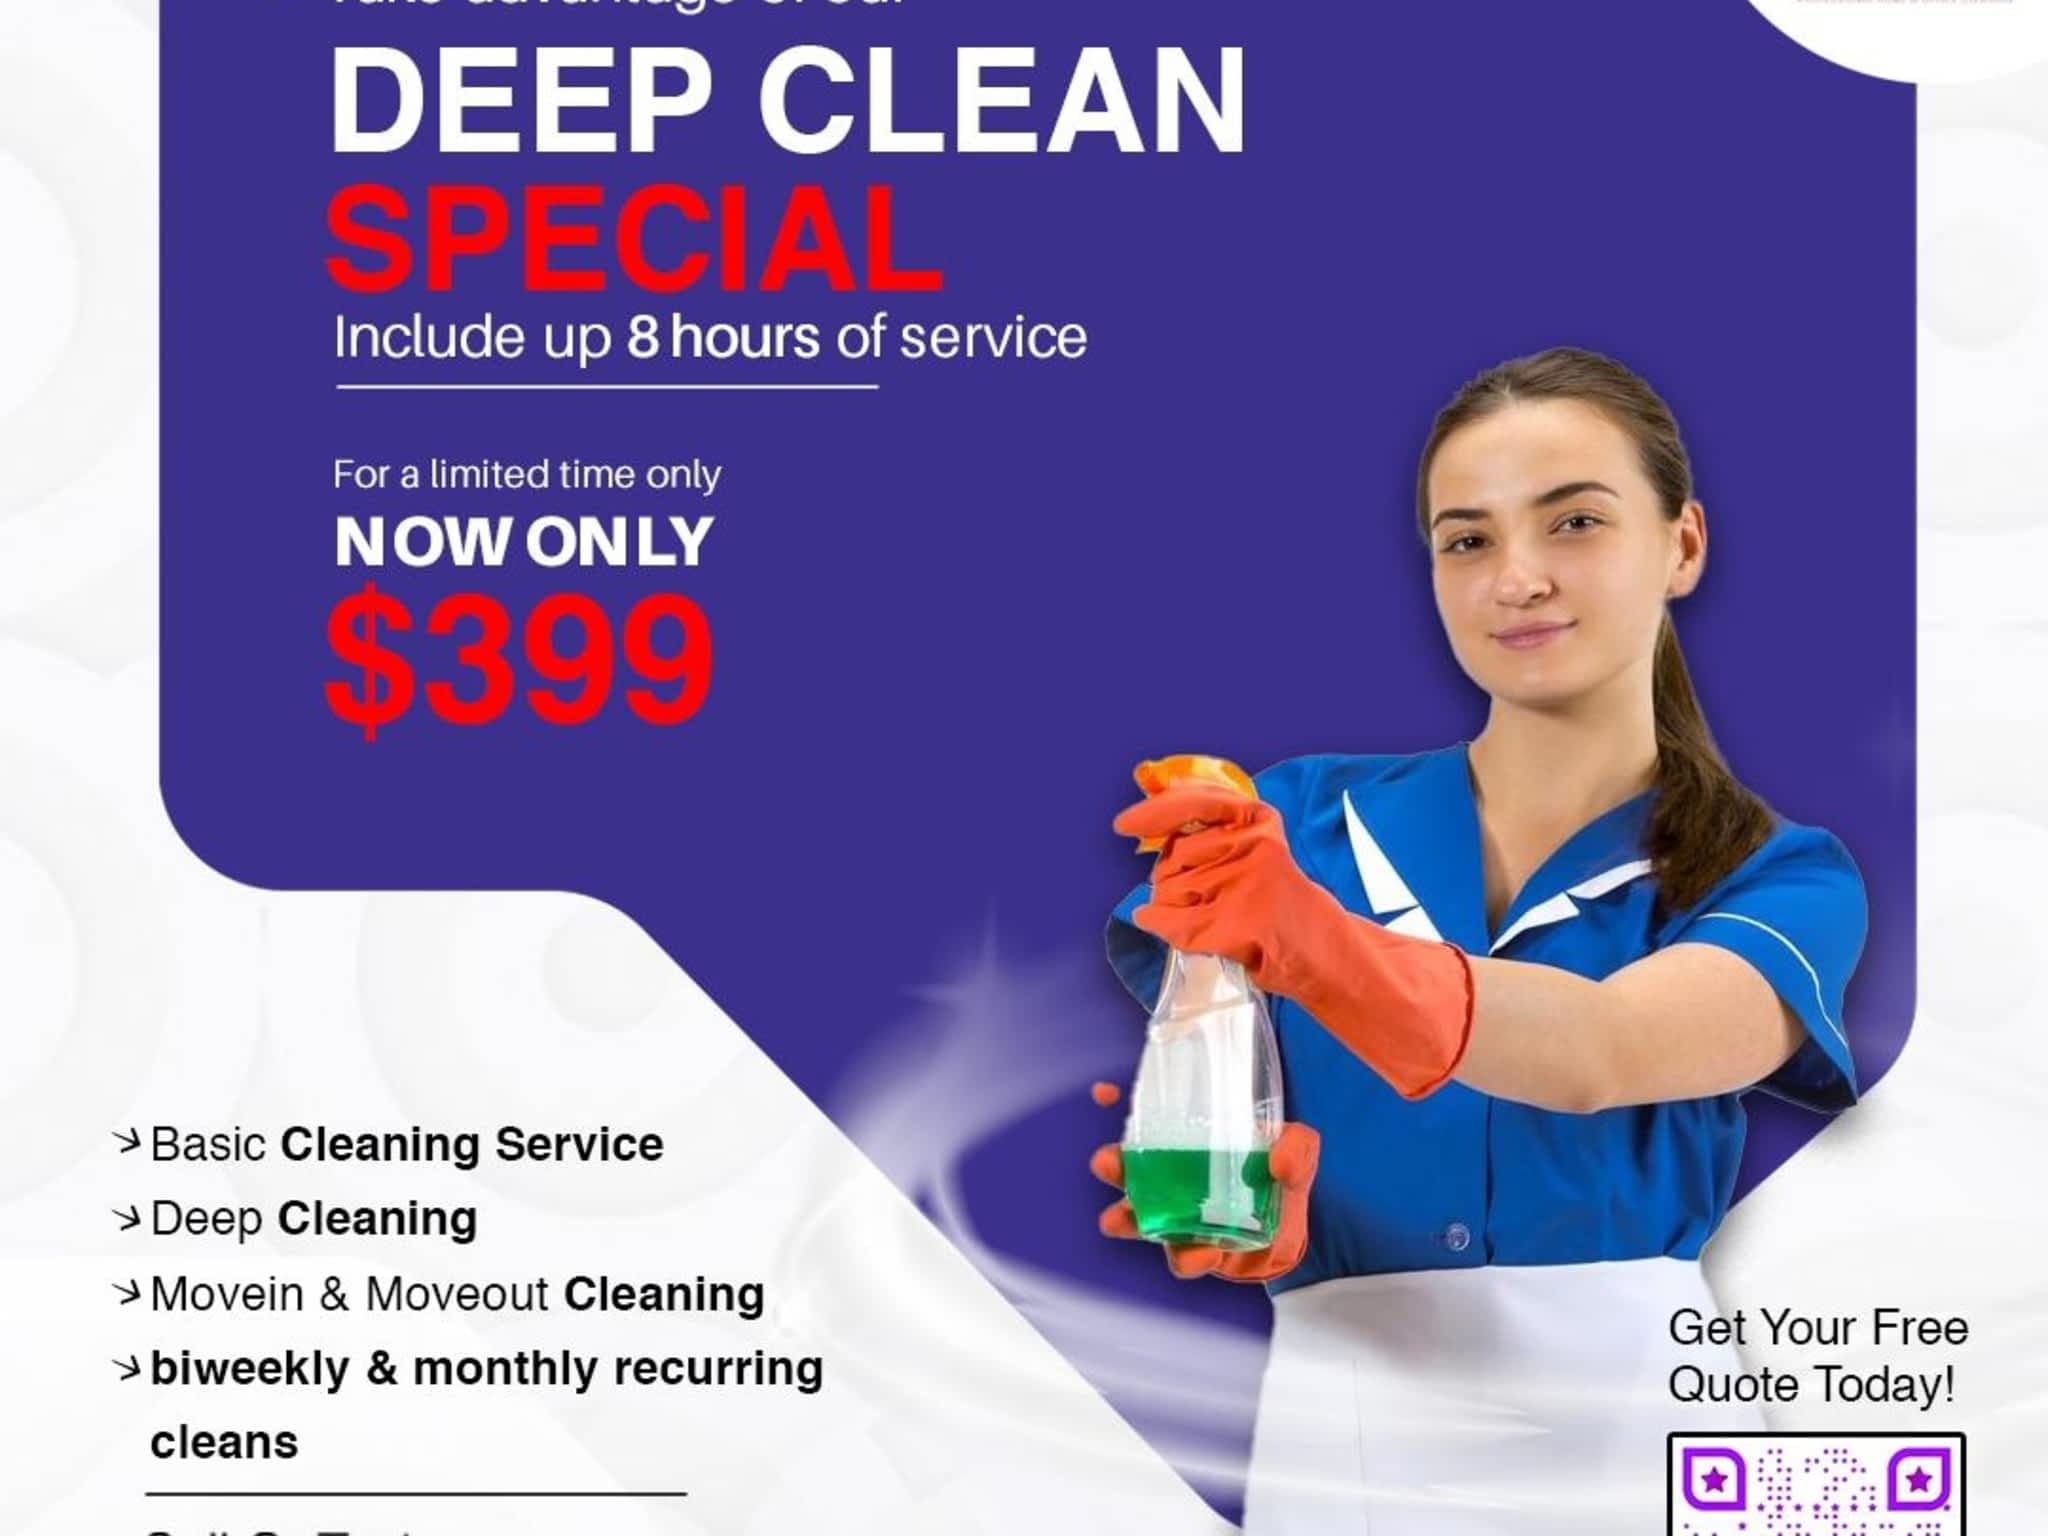 photo Tidyups Cleaning Service Inc